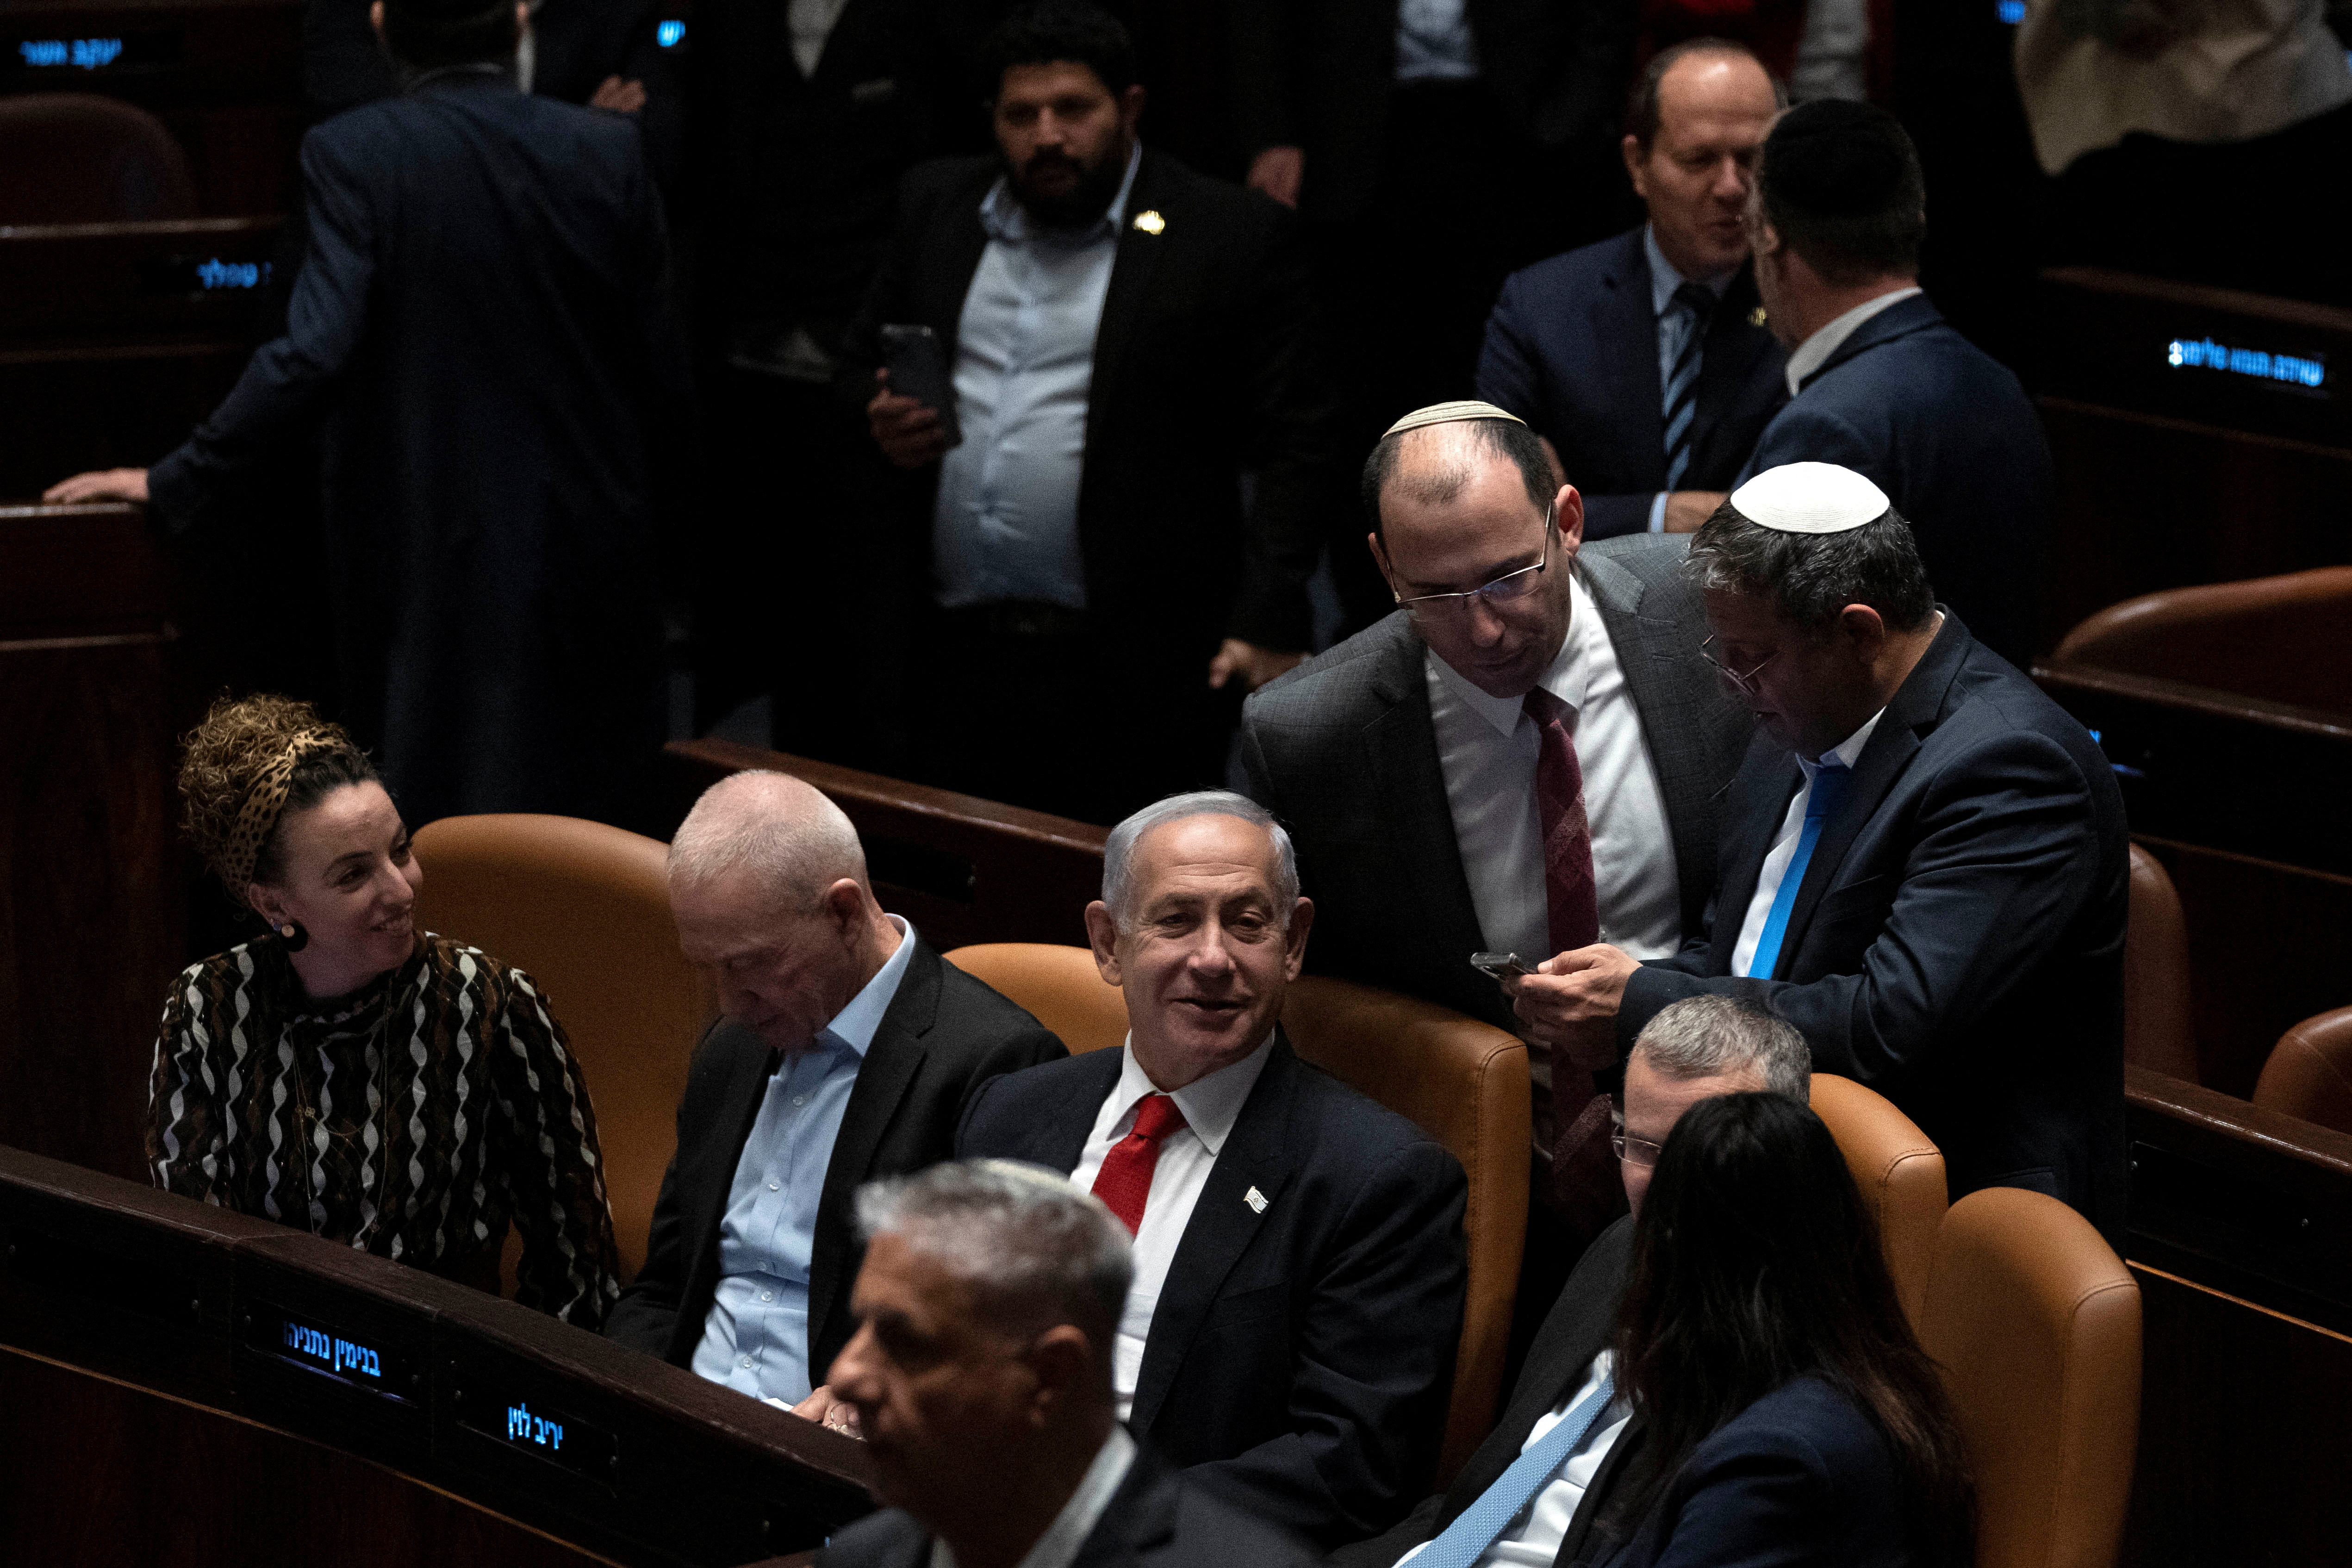 Israel’s Prime Minister Benjamin Netanyahu after his speech in Israel’s parliament, the Knesset, just before a vote on a contentious plan to overhaul the country’s legal system, in Jerusalem